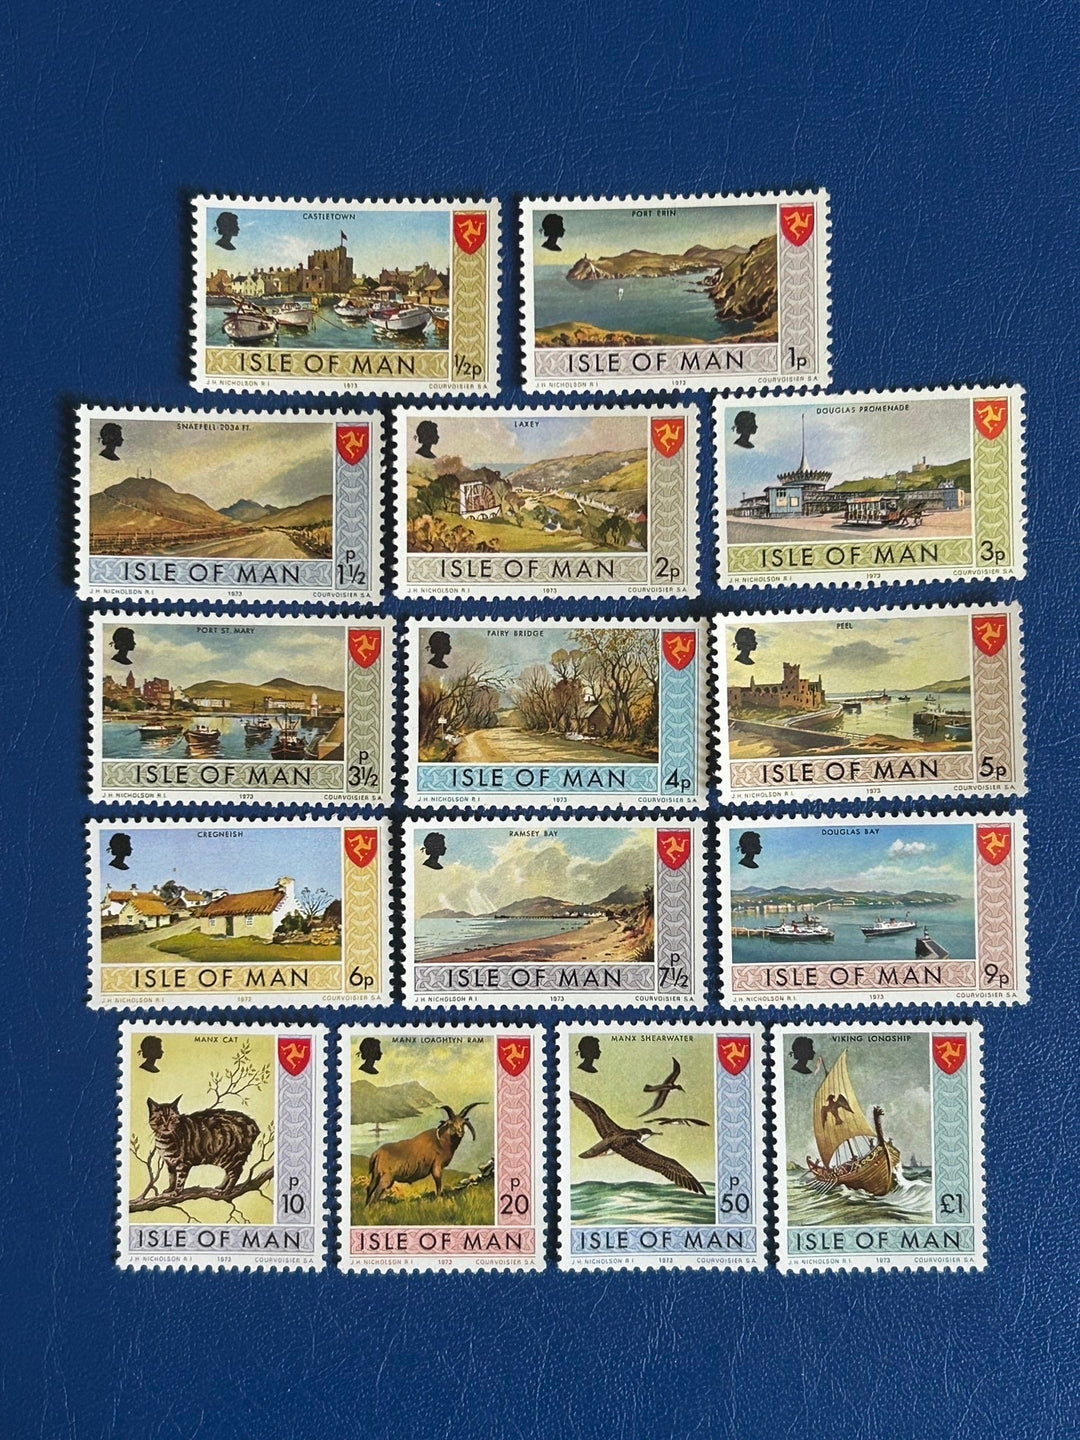 Isle of Man - Original Vintage Postage Stamps - 1975 - Views - for the collector, artist or crafter